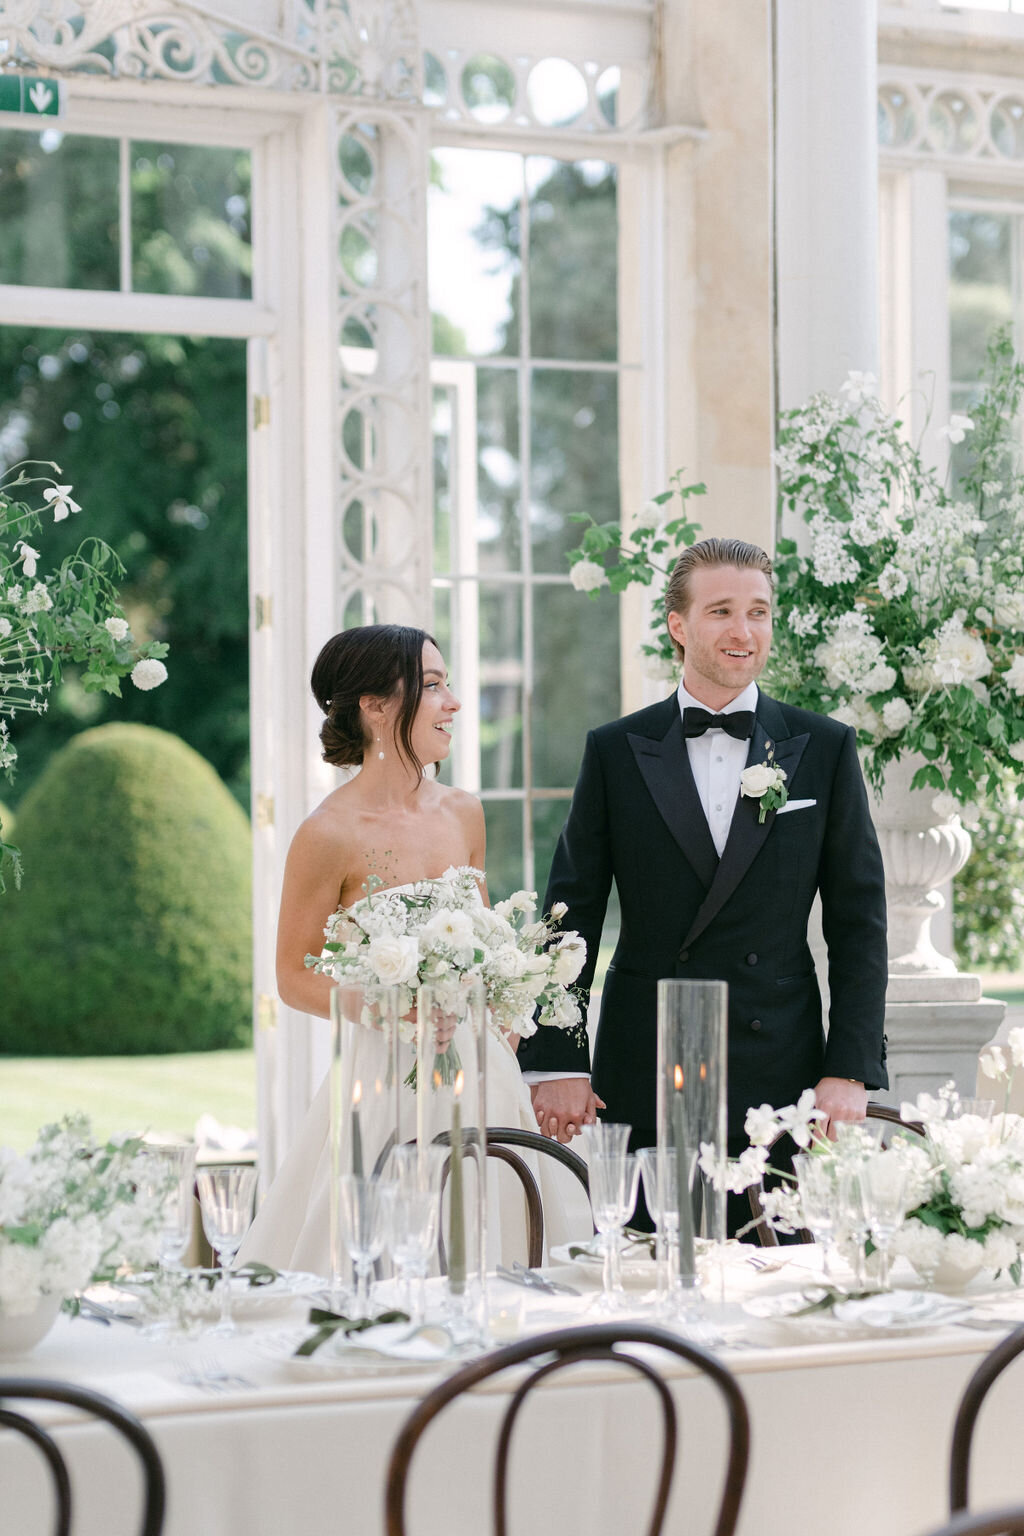 Attabara Studio UK Luxury Wedding Planners at Syon Park & with Charlotte Wise0849